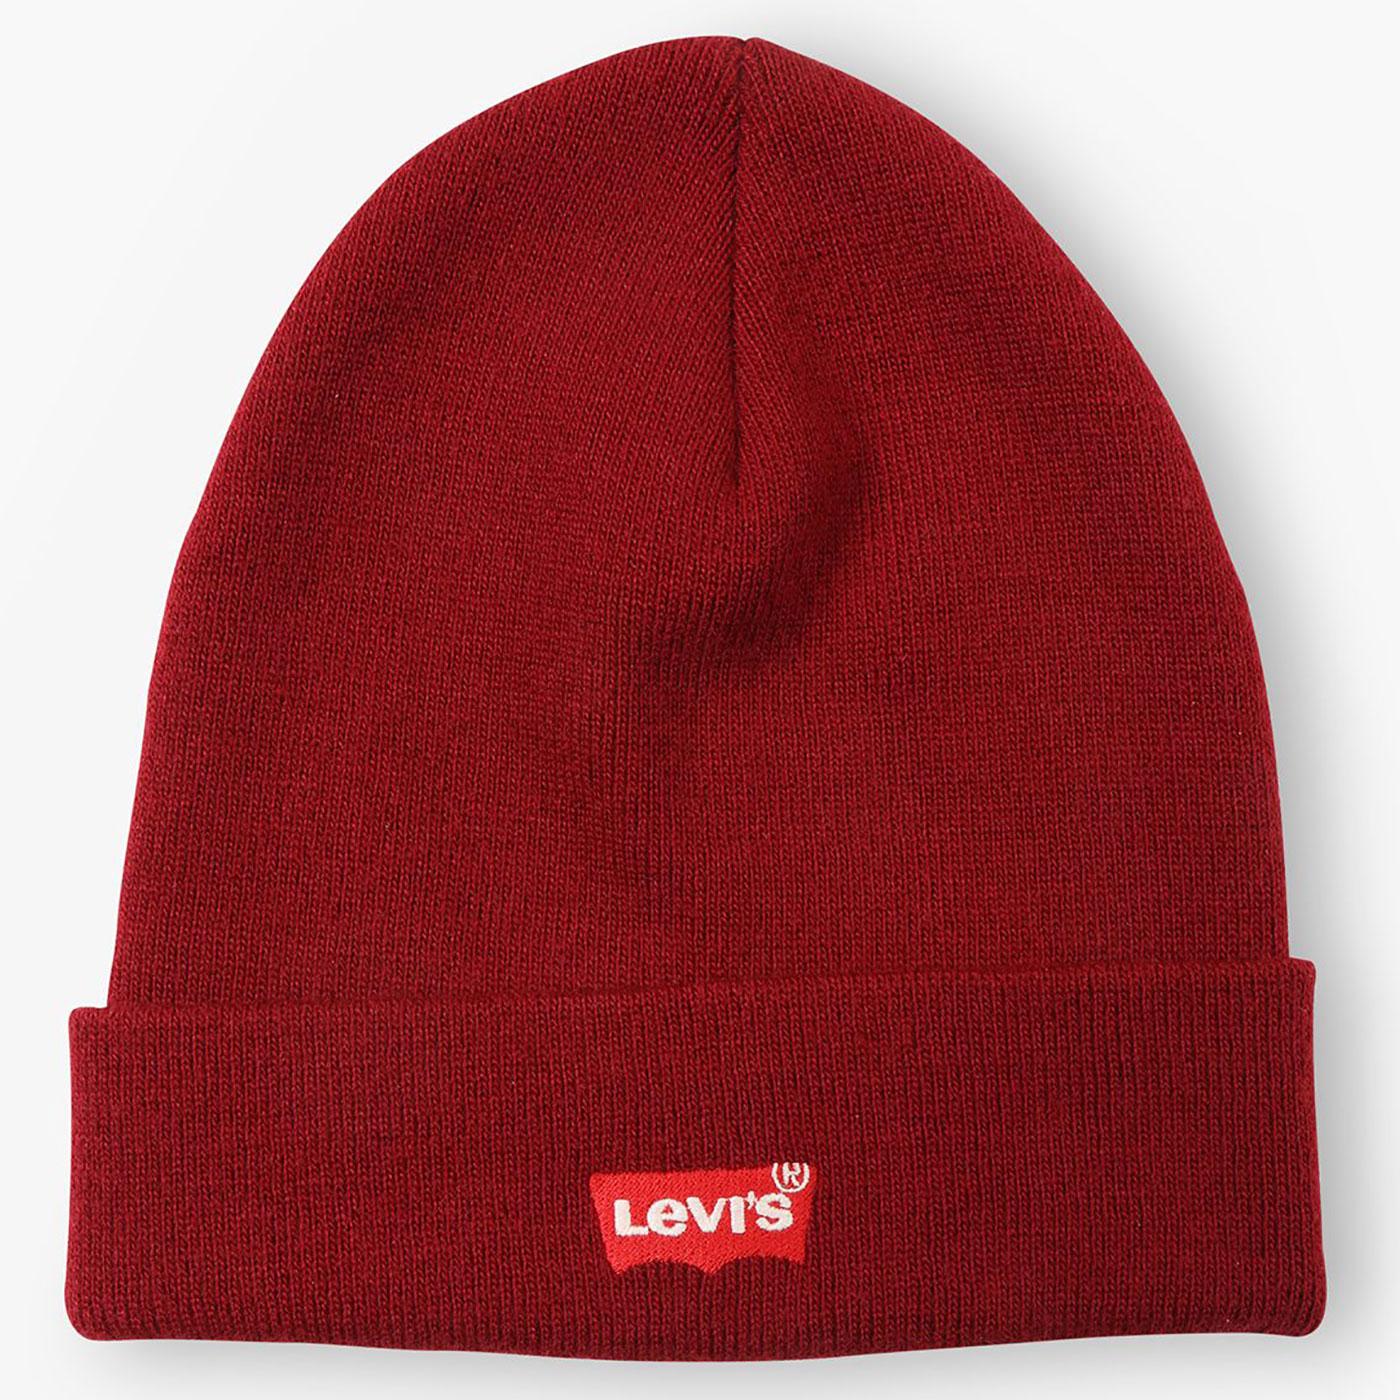 LEVI® Retro Batwing Embroidered Knit Beanie Hat DB